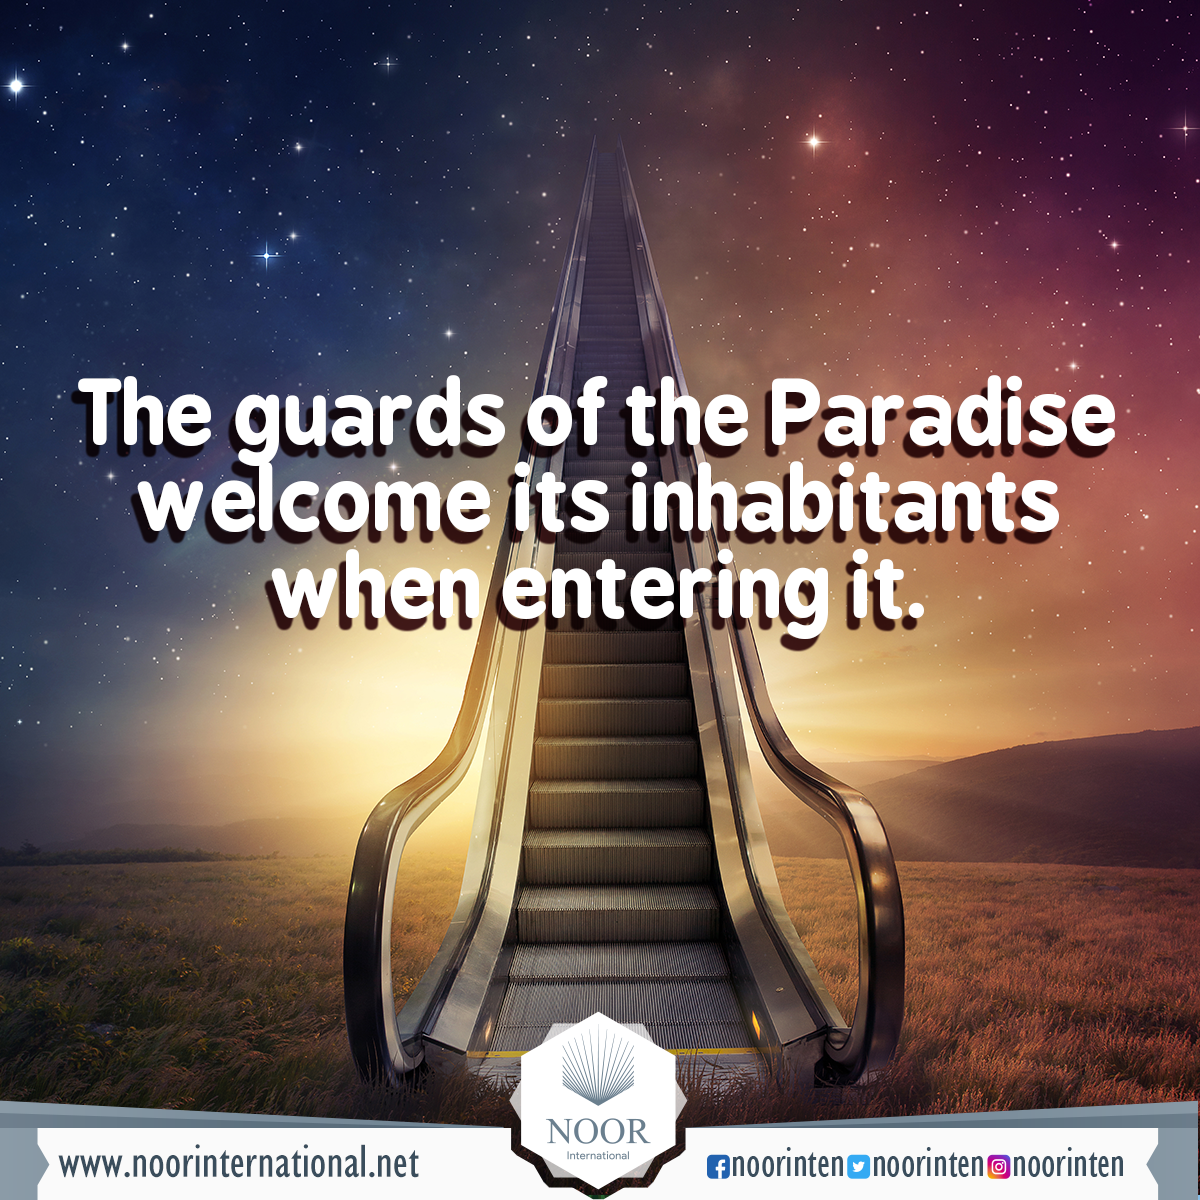 The guards of the Paradise welcome its inhabitants when entering it.